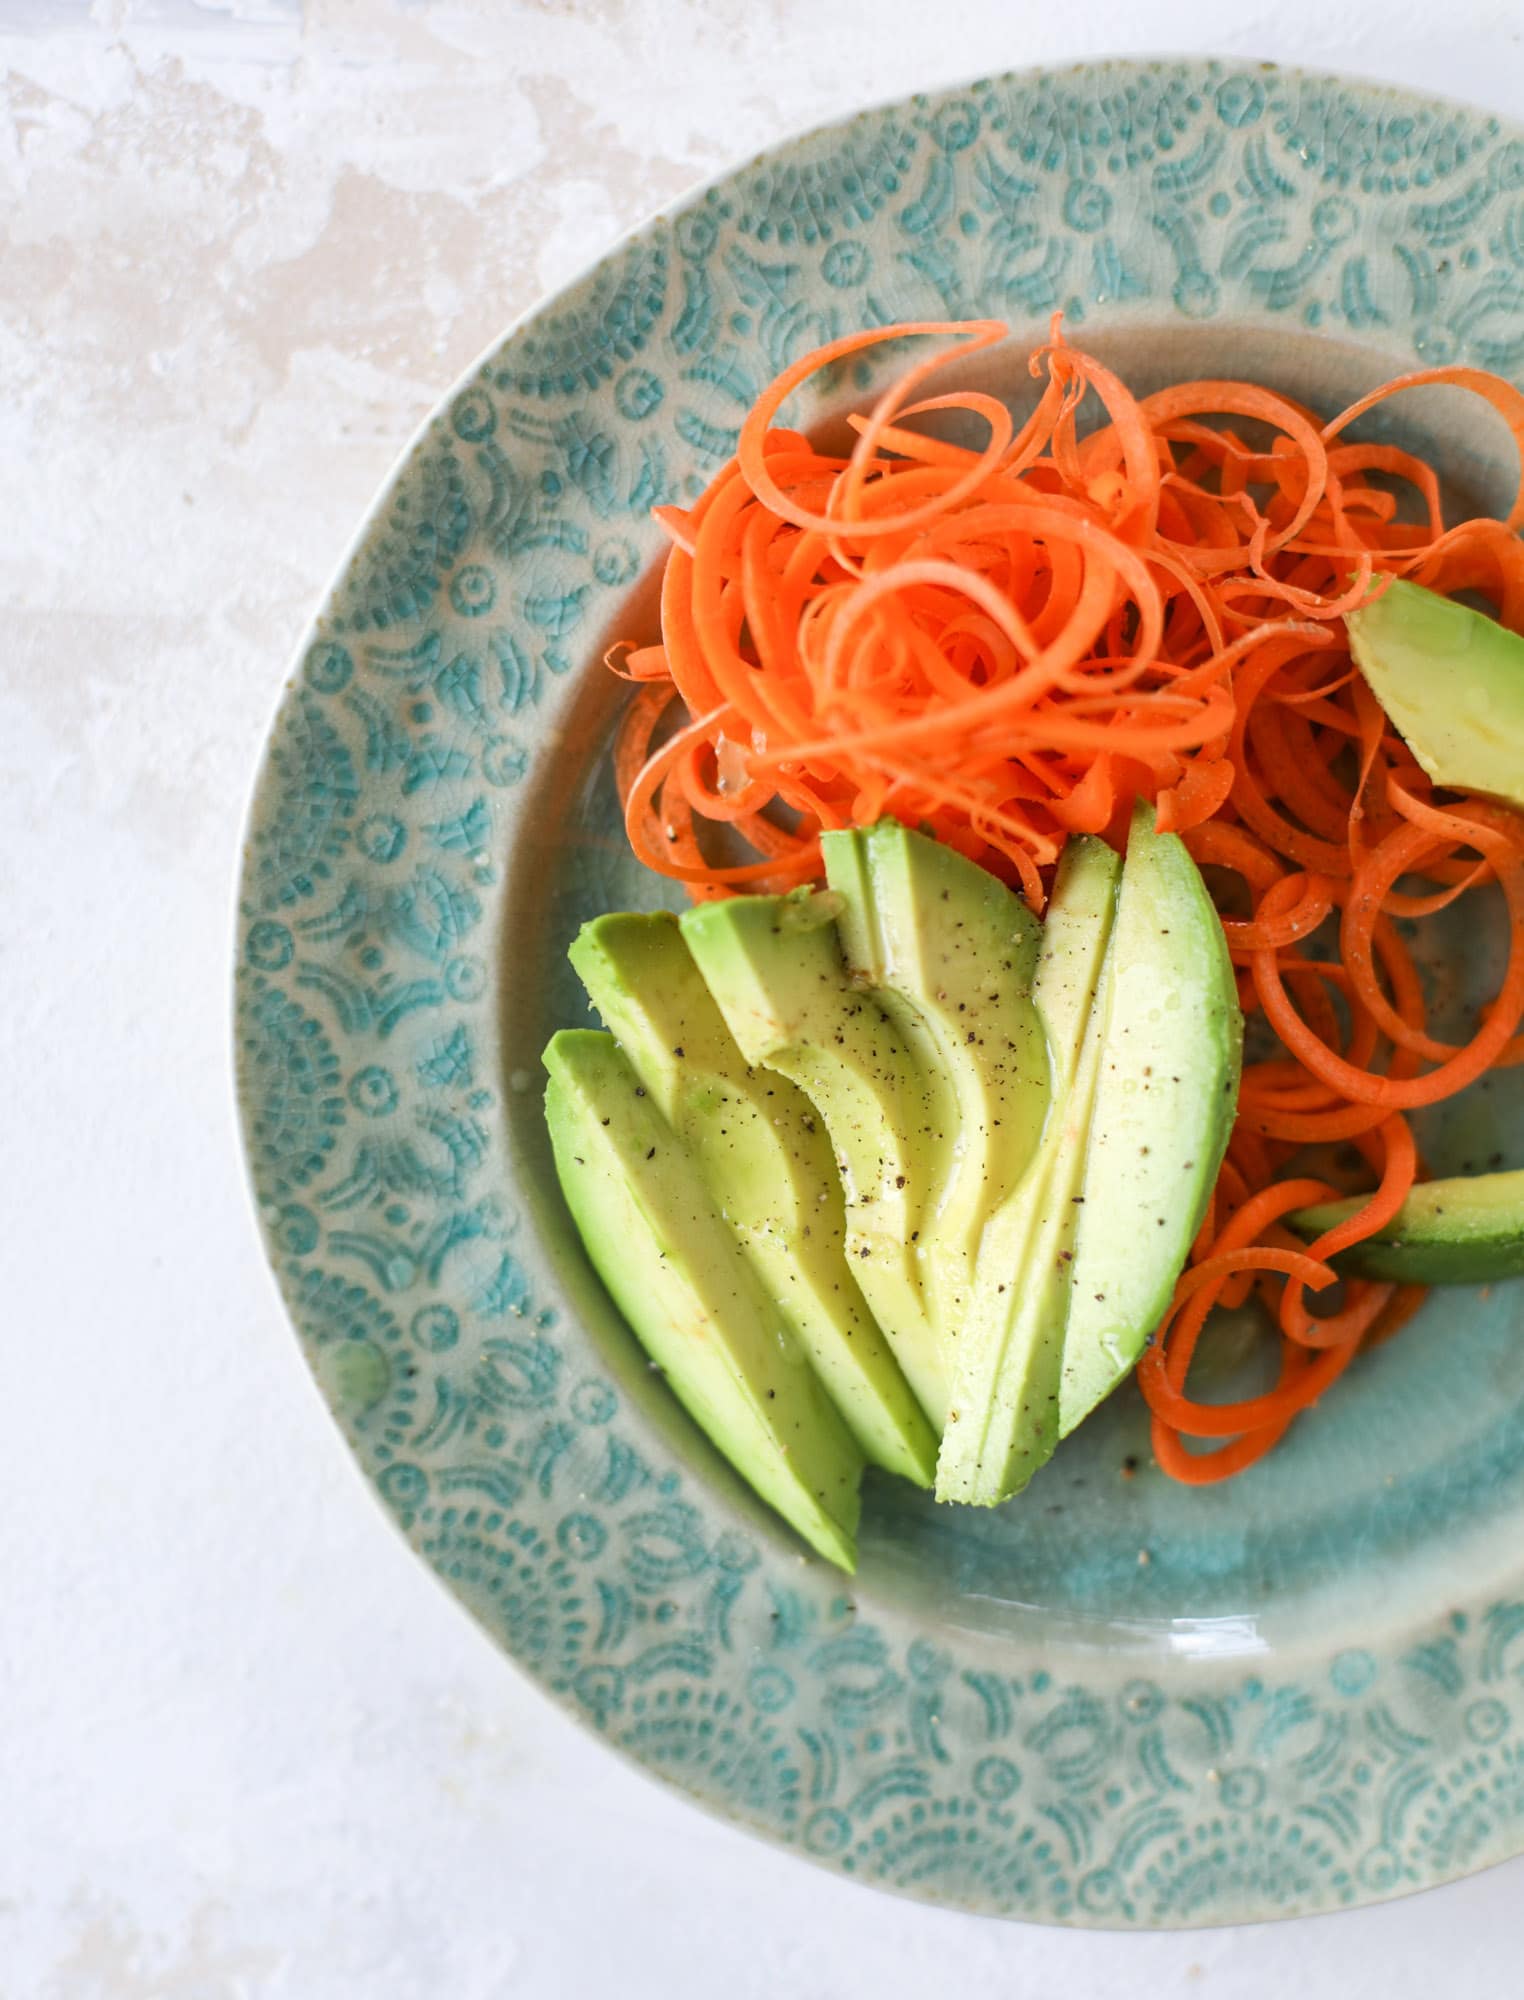 This thai avocado salad is loaded with mango, red pepper, carrots, green onions and drizzled with a peanut butter vinaigrette. It's an amazing side salad or a fabulous dinner salad - add on chickpeas or shrimp or chicken if you wish! I howsweeteats.com #thai #avocado #salad #peanutbutter #mango #lime